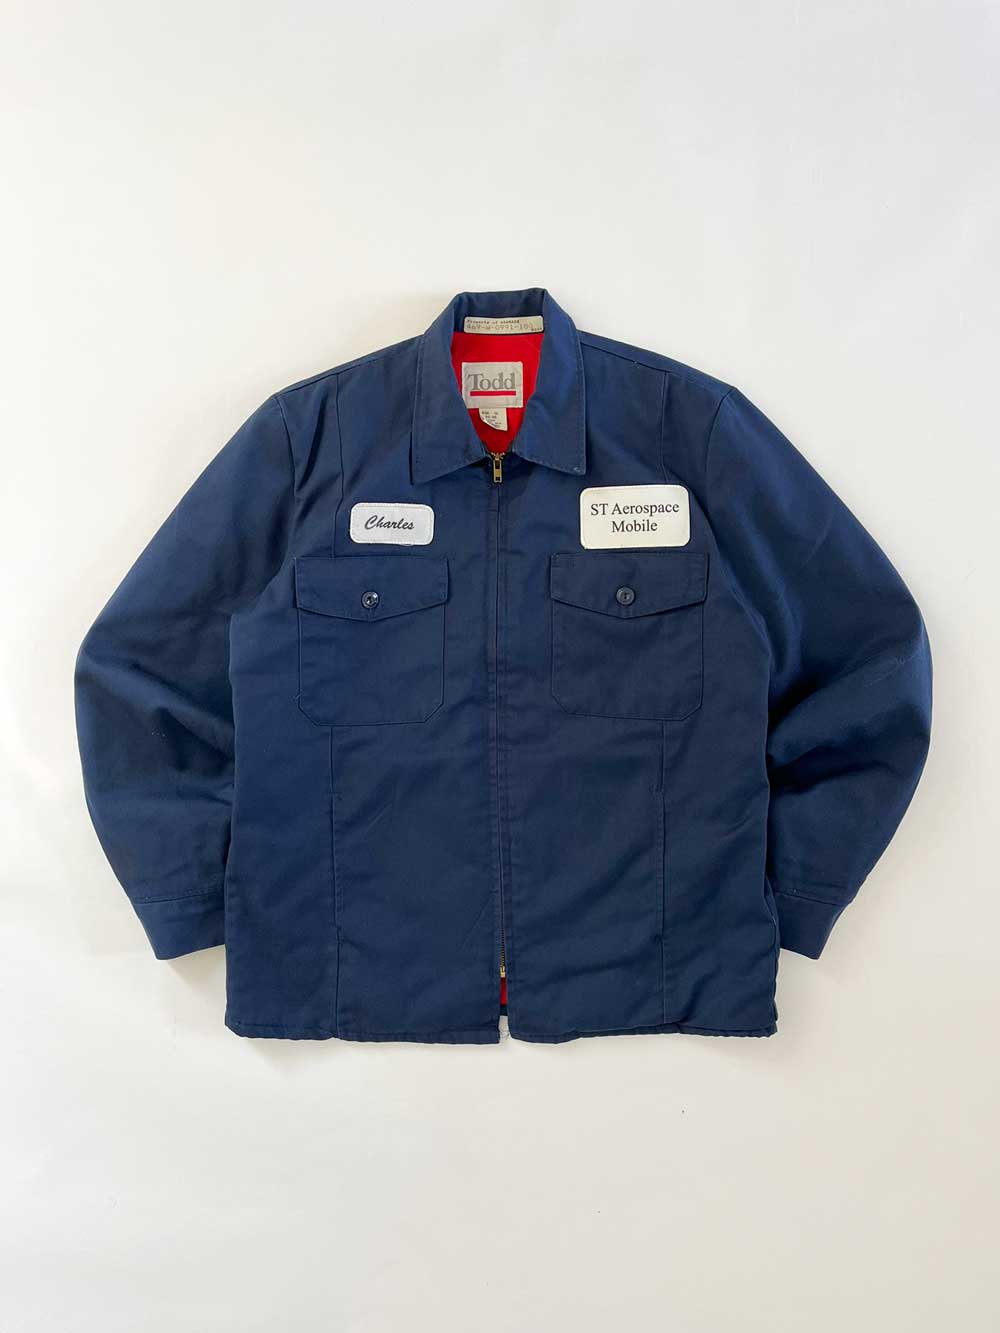 Vintage work jacket produced in the 1980s by Tod Quality fabric and perfectly maintained over time. Patch applied on the front, "Charles" e "ST Engineering". Positioned on a neutral white background.